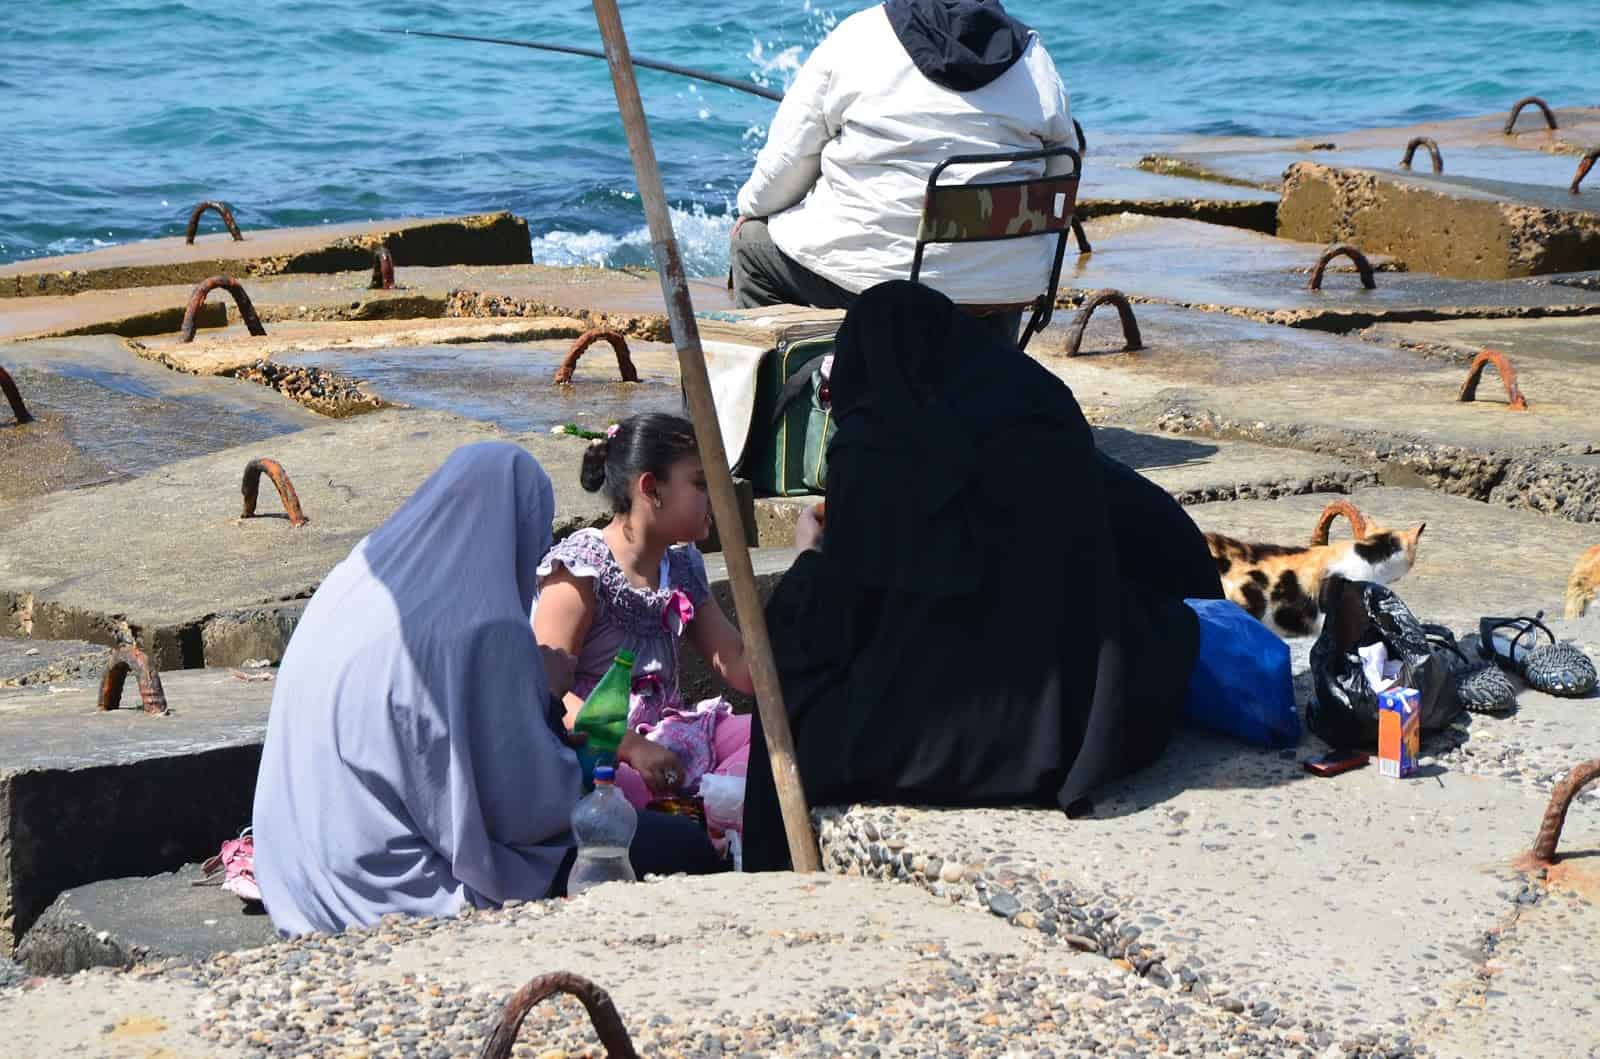 Picnic by the sea in Alexandria, Egypt